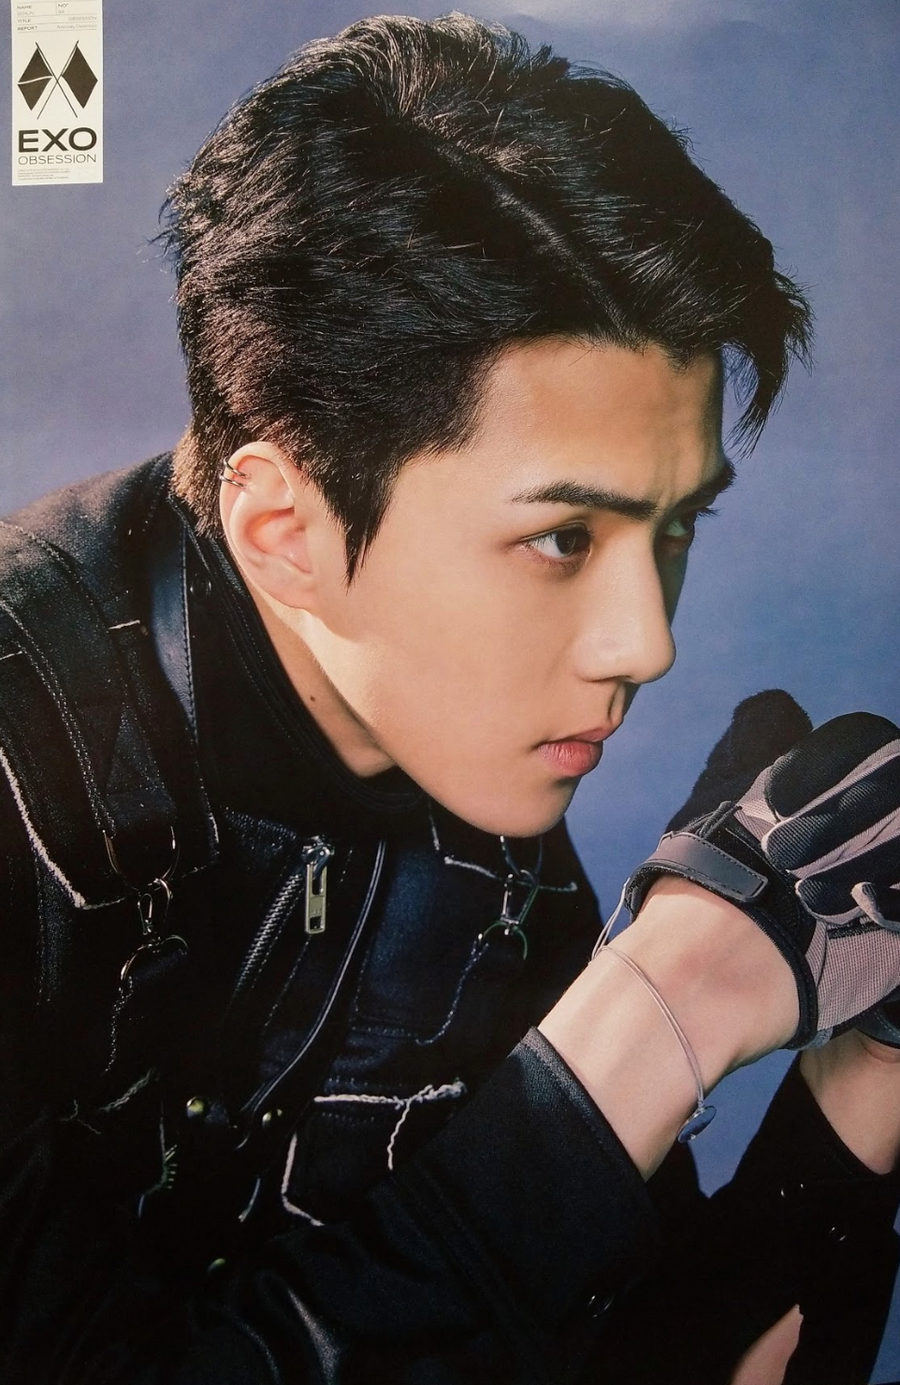 EXO 6th Album Obsession Official Poster - Photo Concept Sehun C